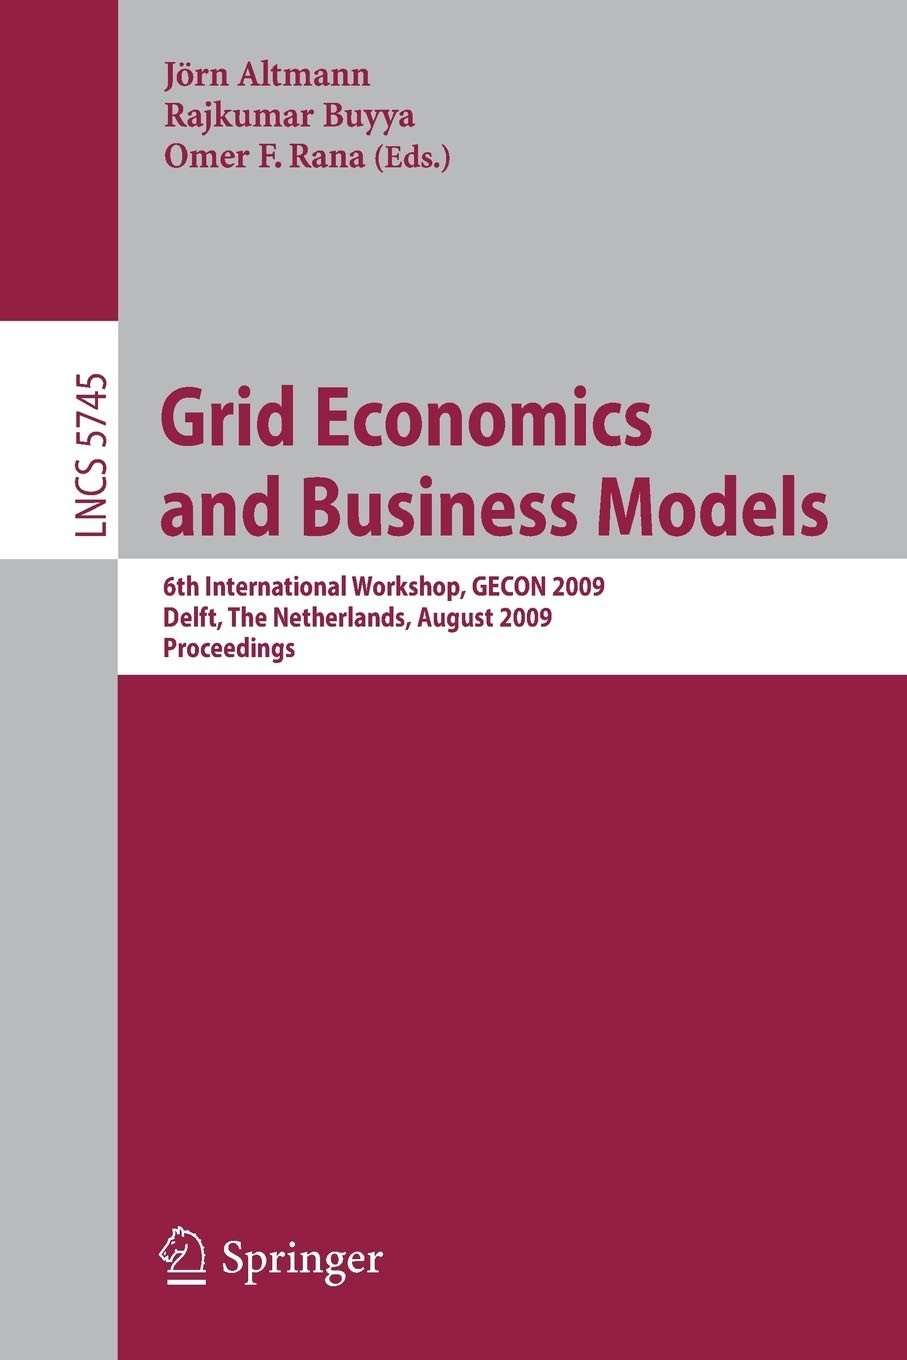 Grid Economics and Business Models: 6th International Workshop, GECON 2009, Delft, the Netherlands, August 24, 2009, Proceedings